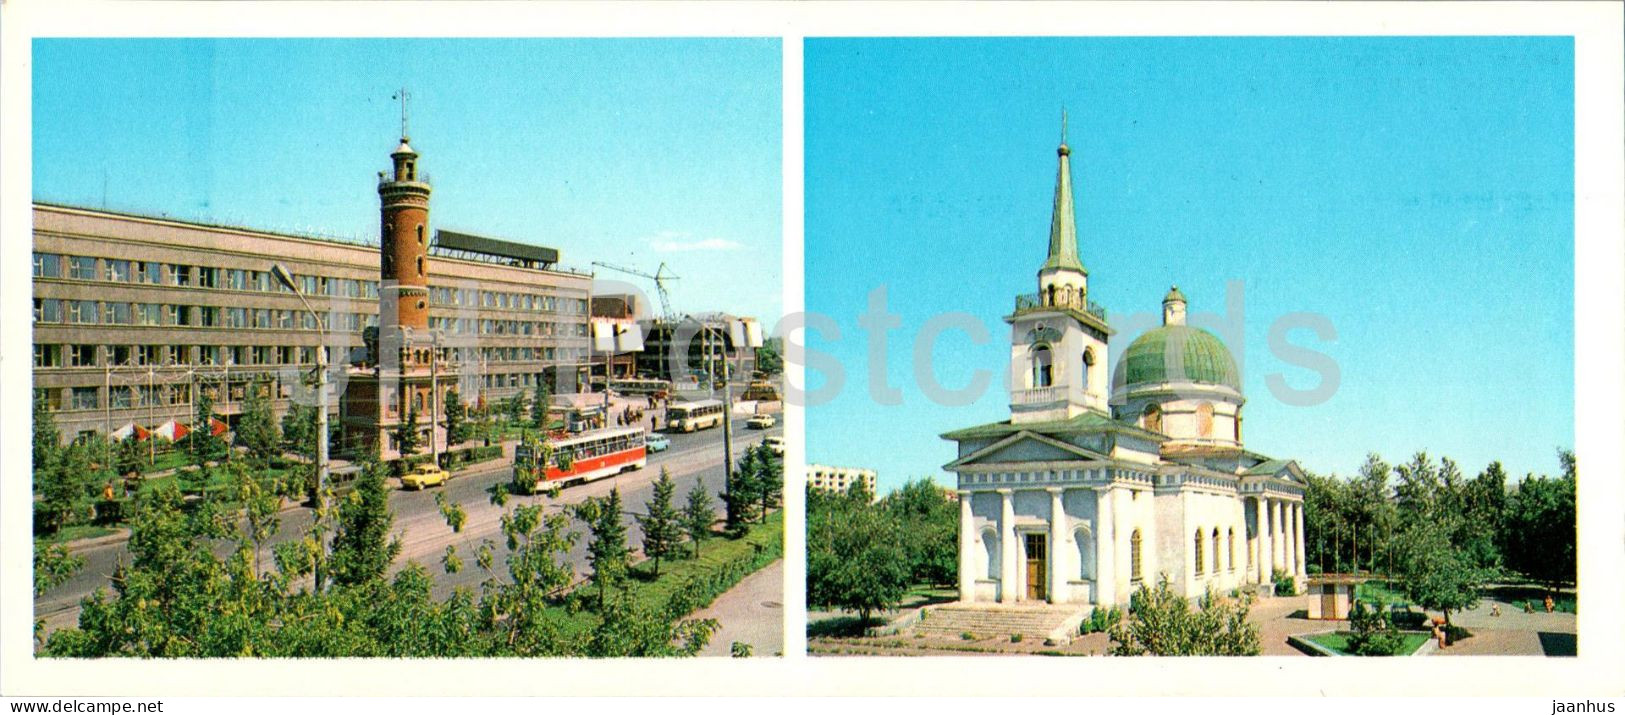 Omsk - Main Post Office - Nikolsky Cathedral - Tram - 1982 - Russia USSR - Unused - Russie